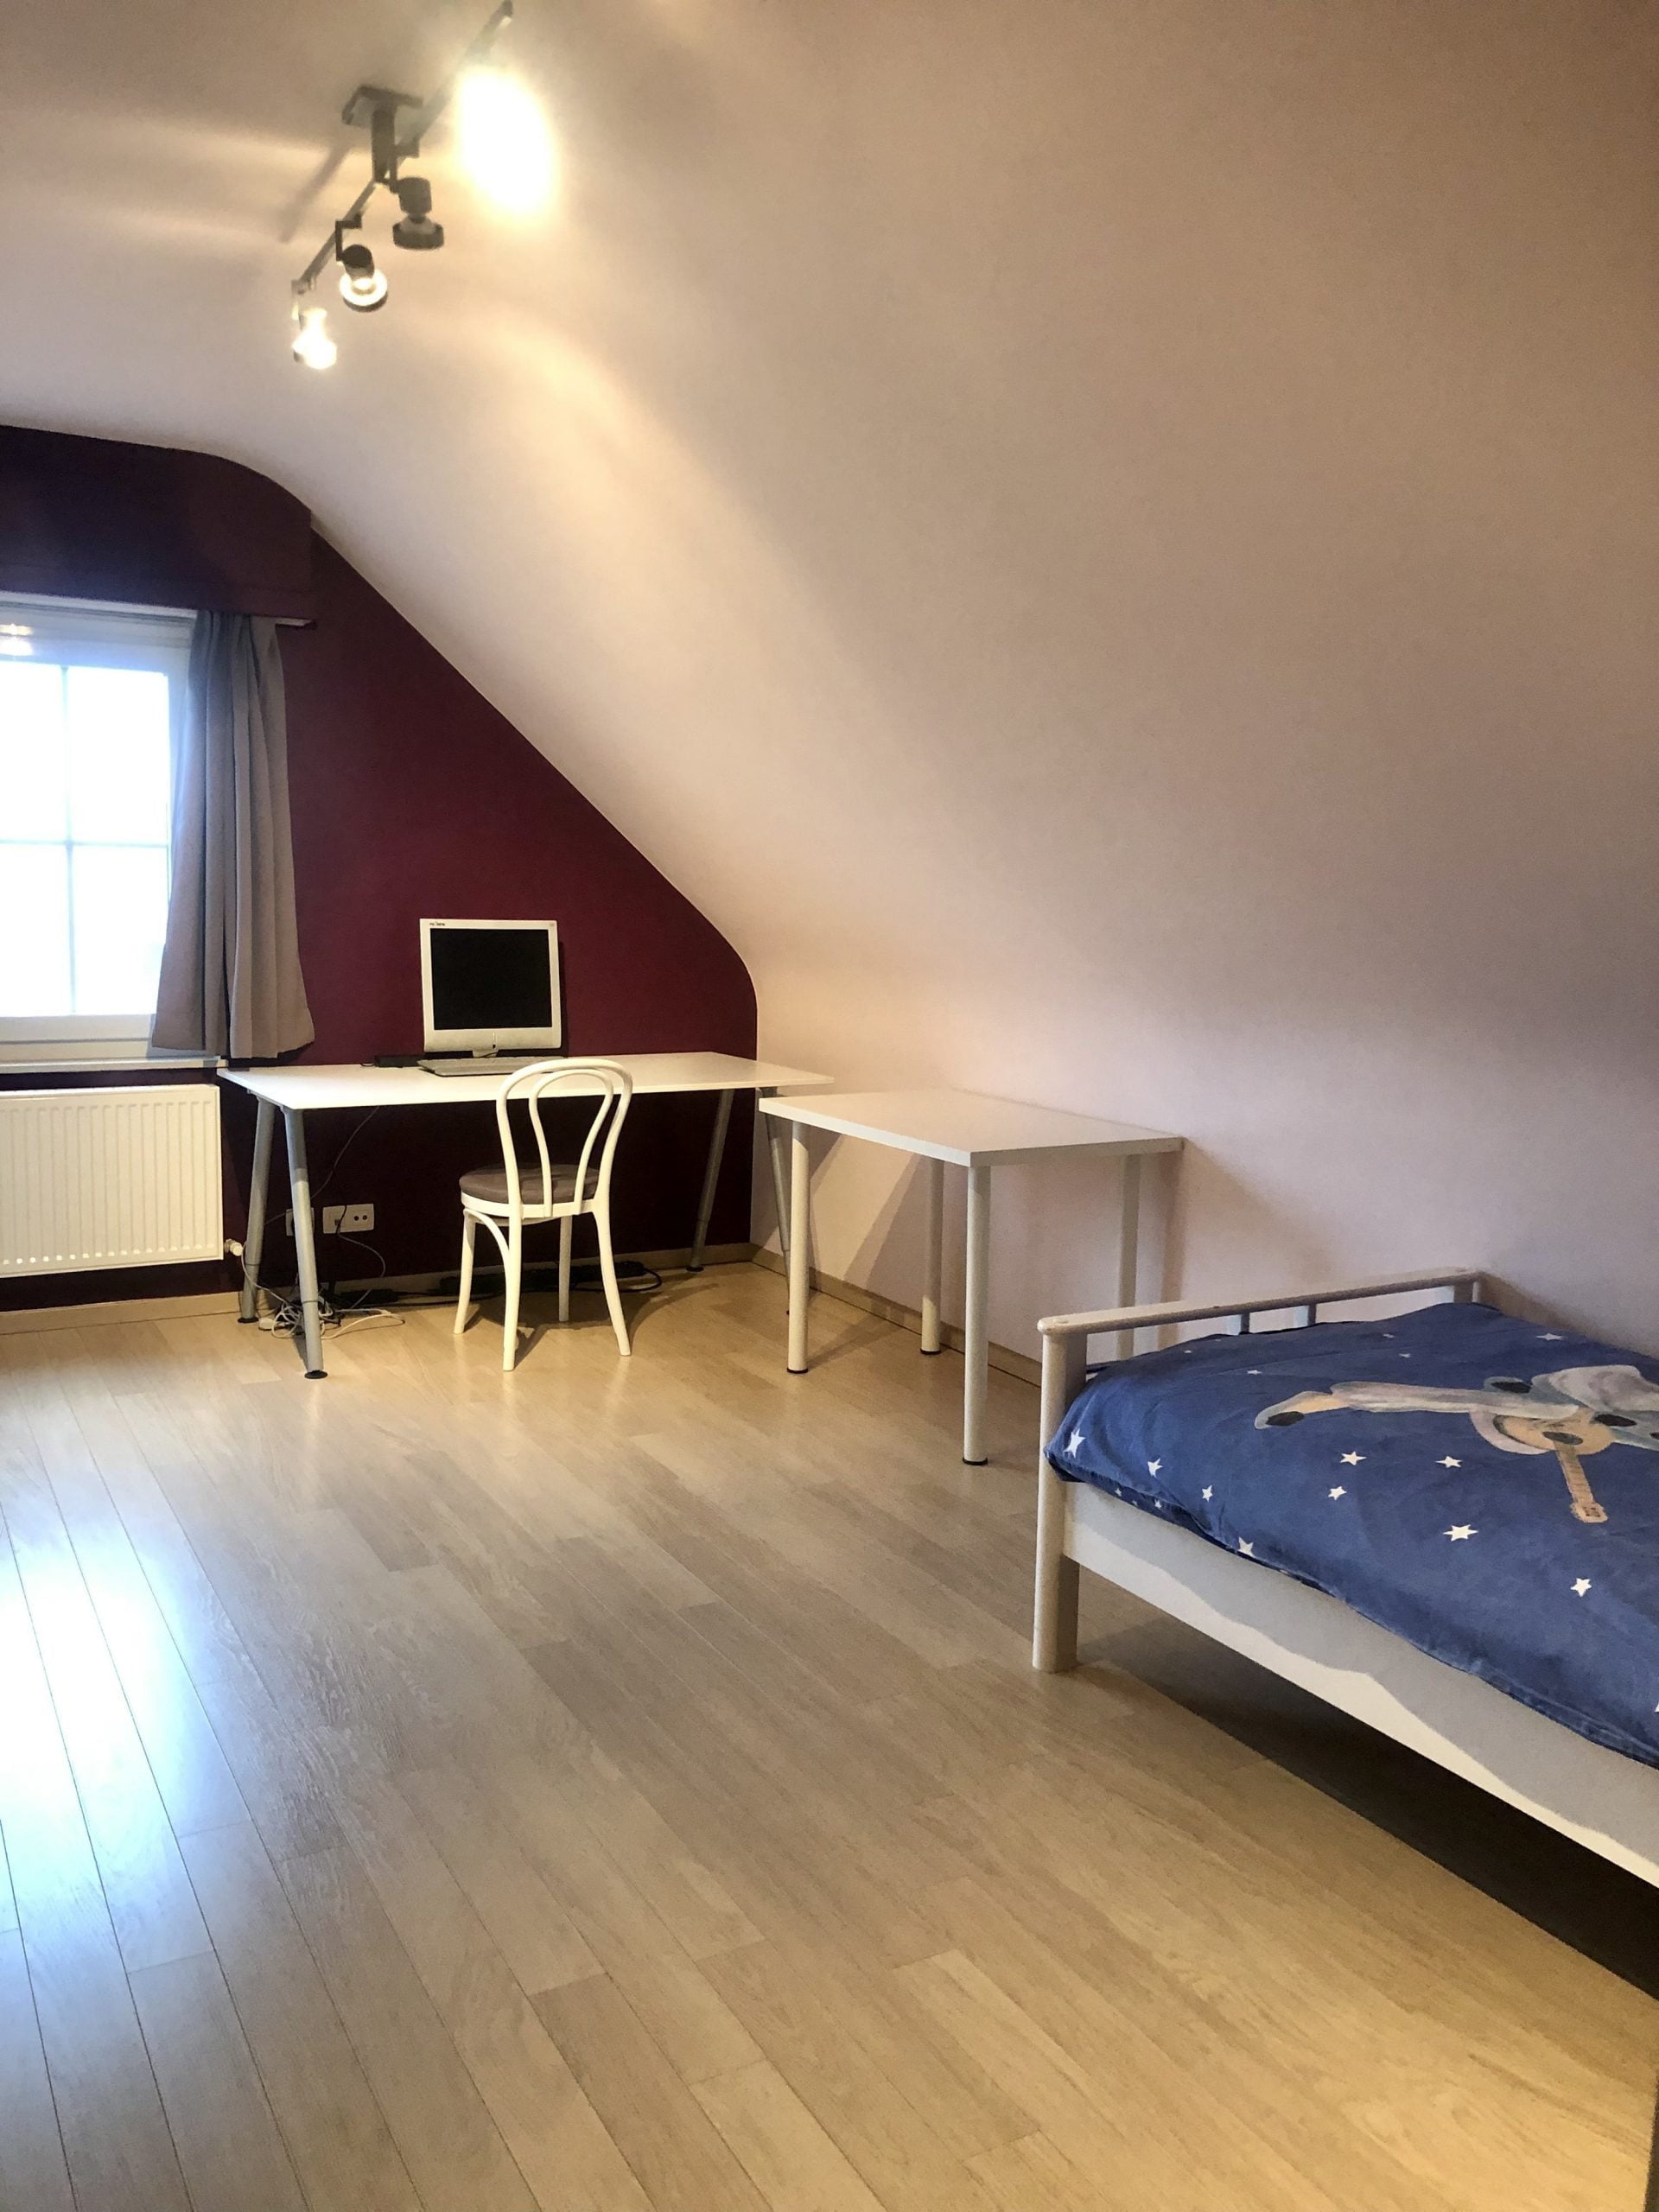 Rommersheide - Furnished house for expats near Antwerp